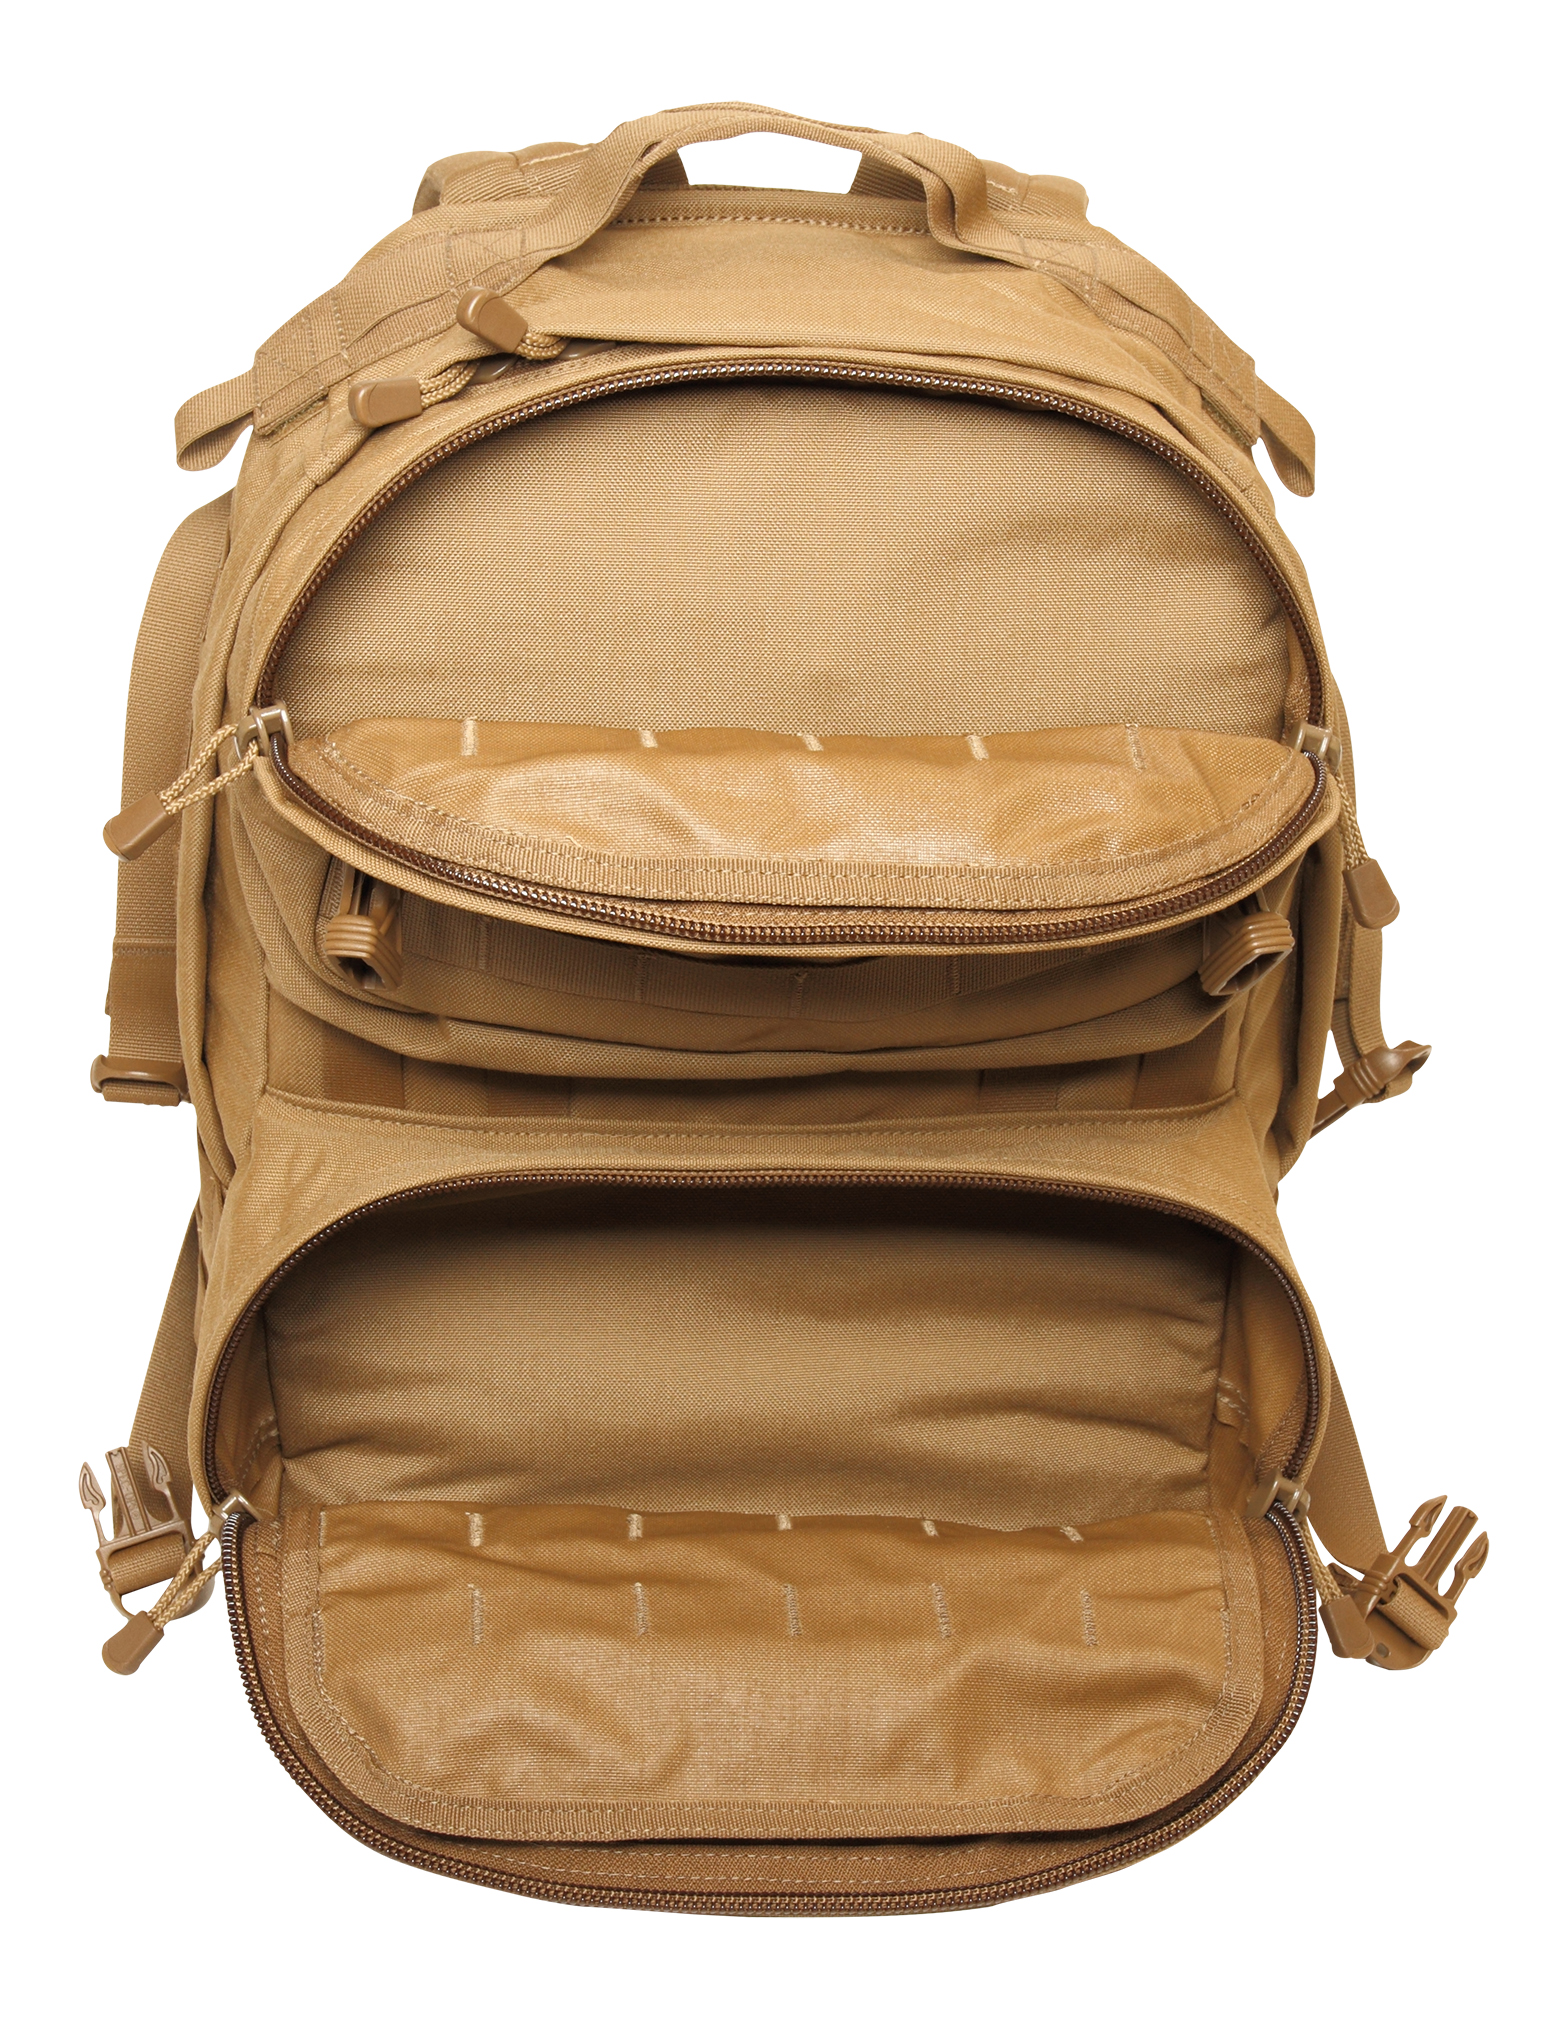 T.H.E. Pack, Tactical, CYB | SPEC-OPS BRAND